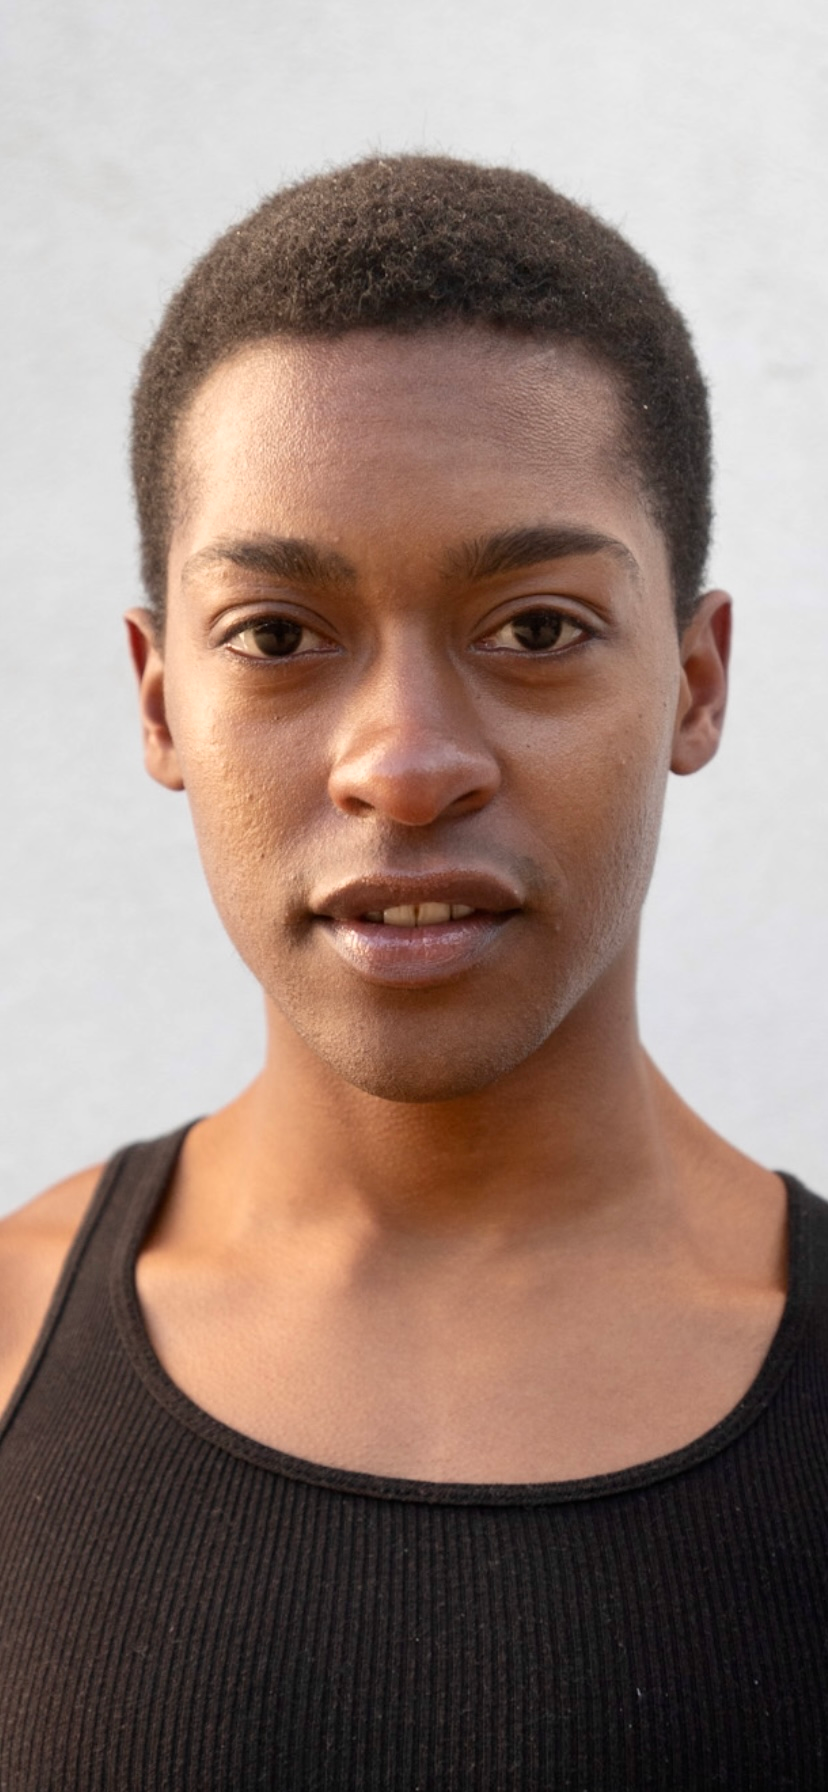 A Black person with short hair wearing a black tank top and standing against a neutral background.